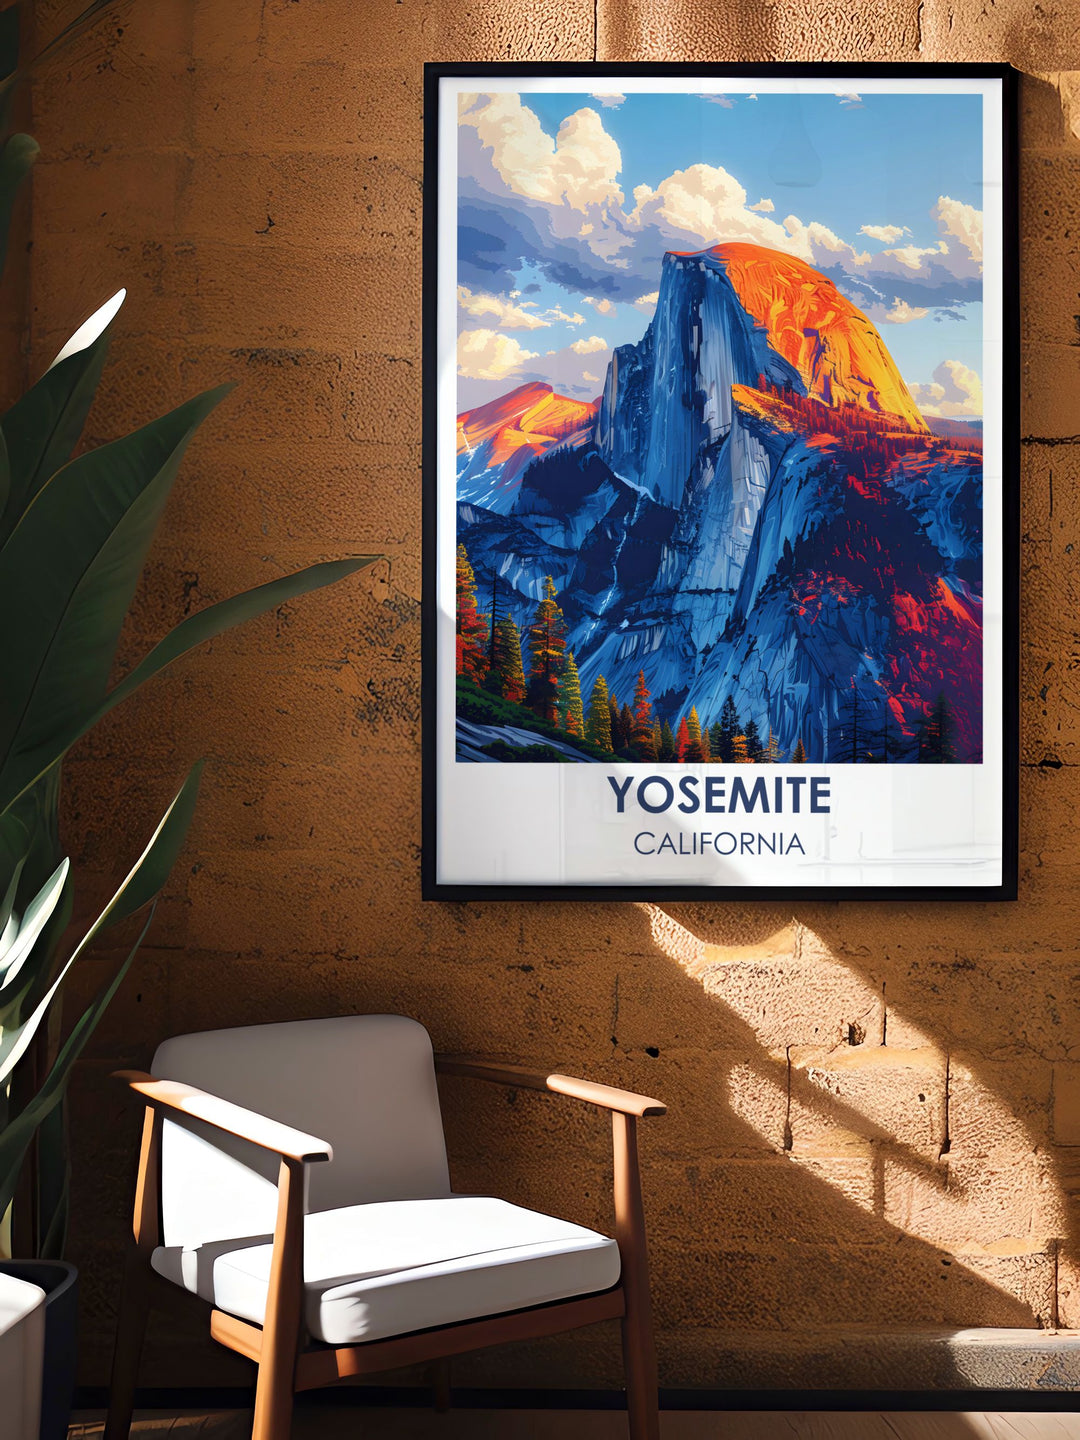 Yosemites Half Dome is beautifully illustrated in this travel poster, highlighting the majestic granite formation and the parks lush scenery, making it an excellent addition to any collection of fine art prints.